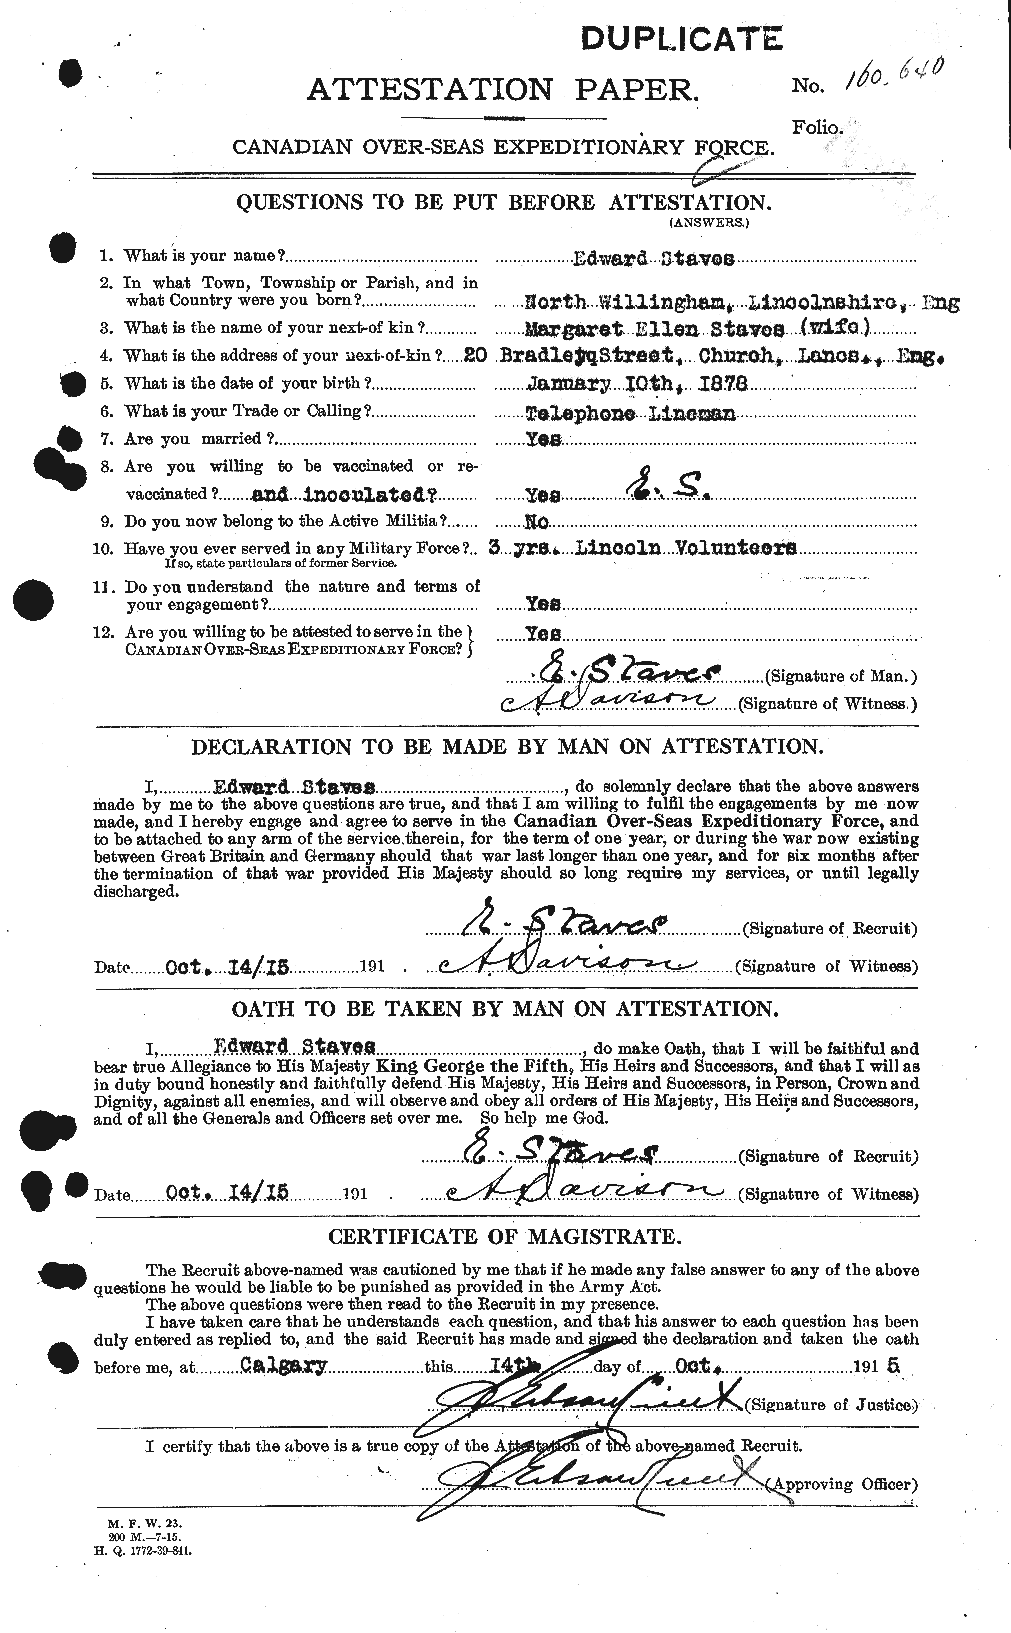 Personnel Records of the First World War - CEF 115808a